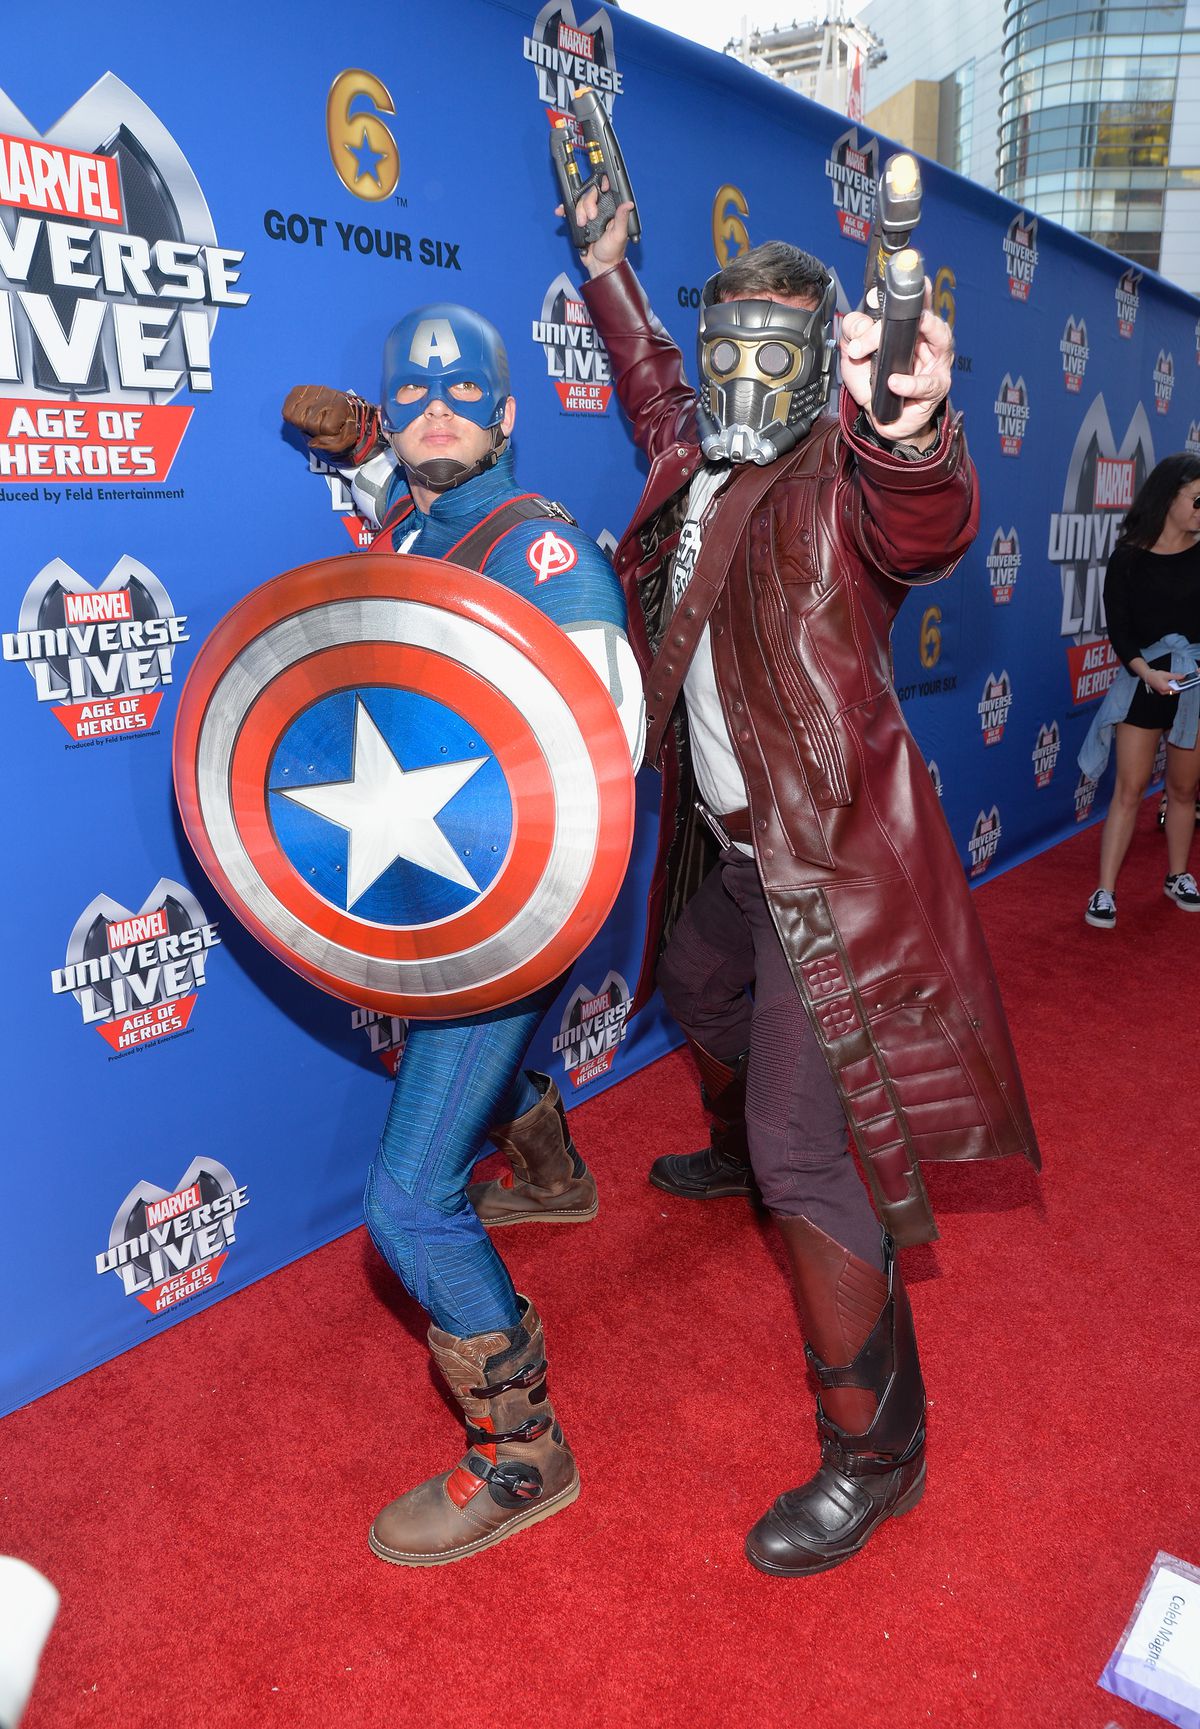 Marvel Universe Live! Age Of Heroes World Premiere - Arrivals